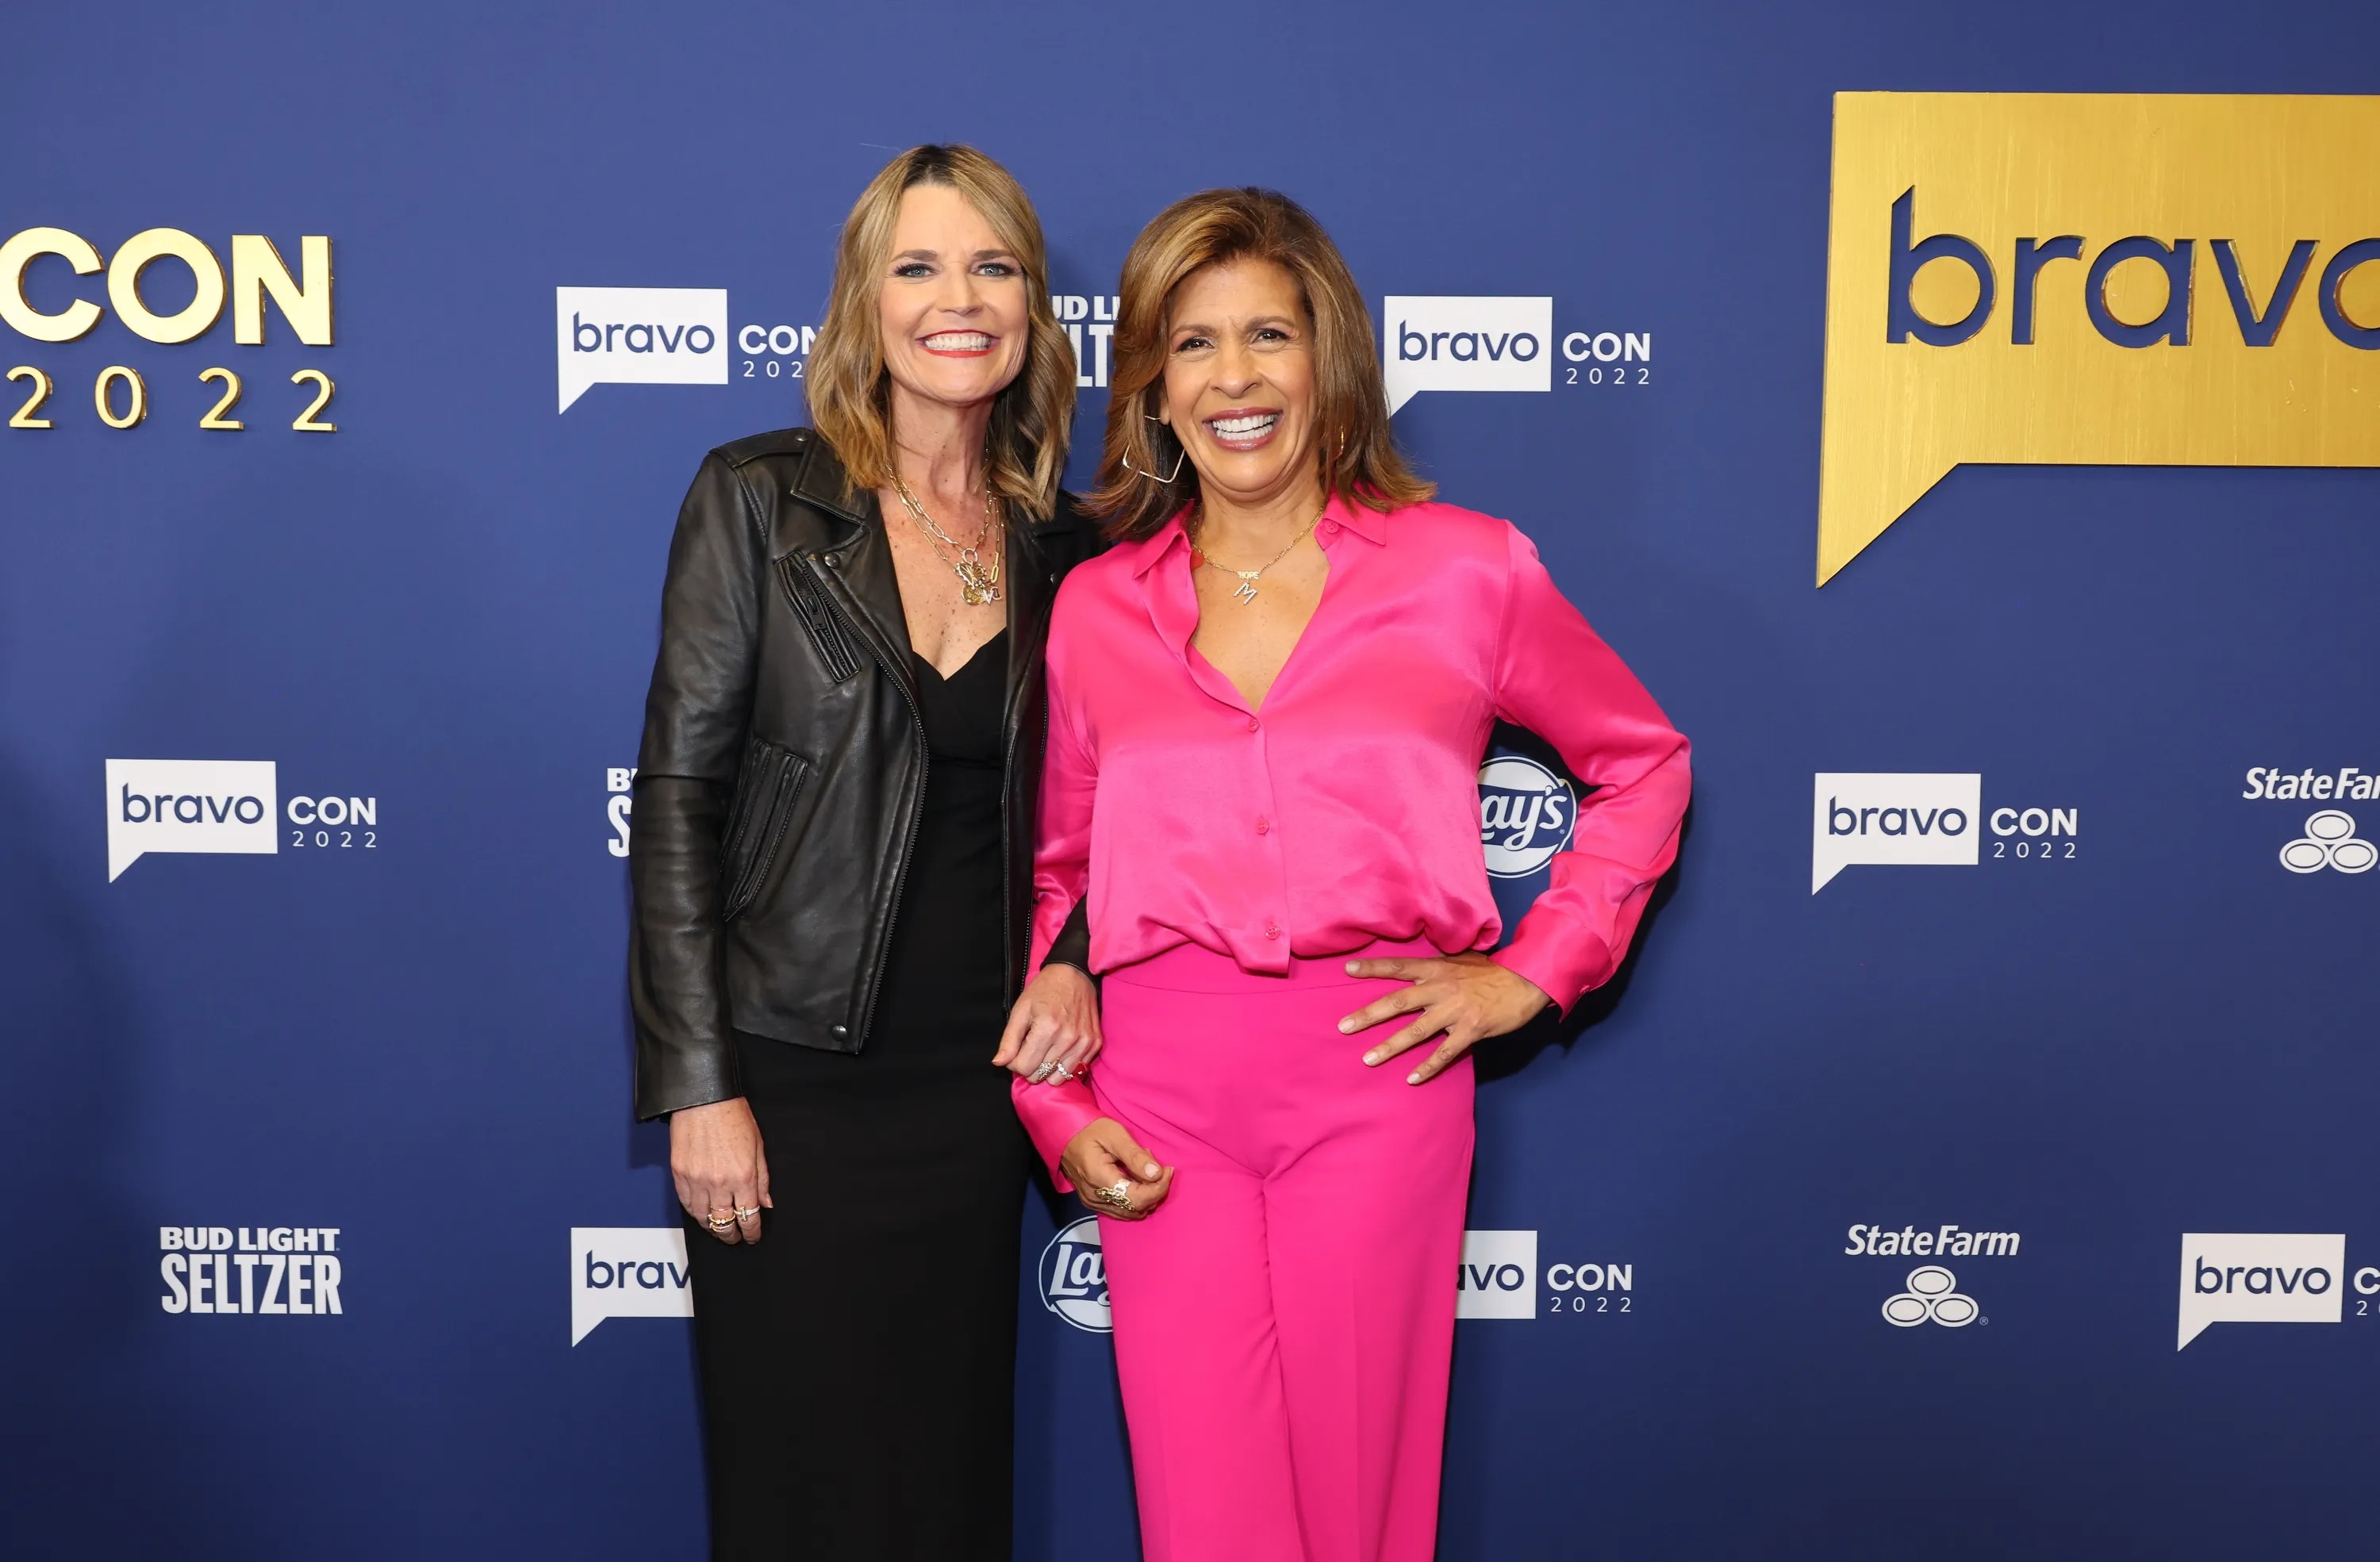 Hoda is also no stranger to hosting events, as she co-hosted Bravo Con with Savannah Guthrie in 2022